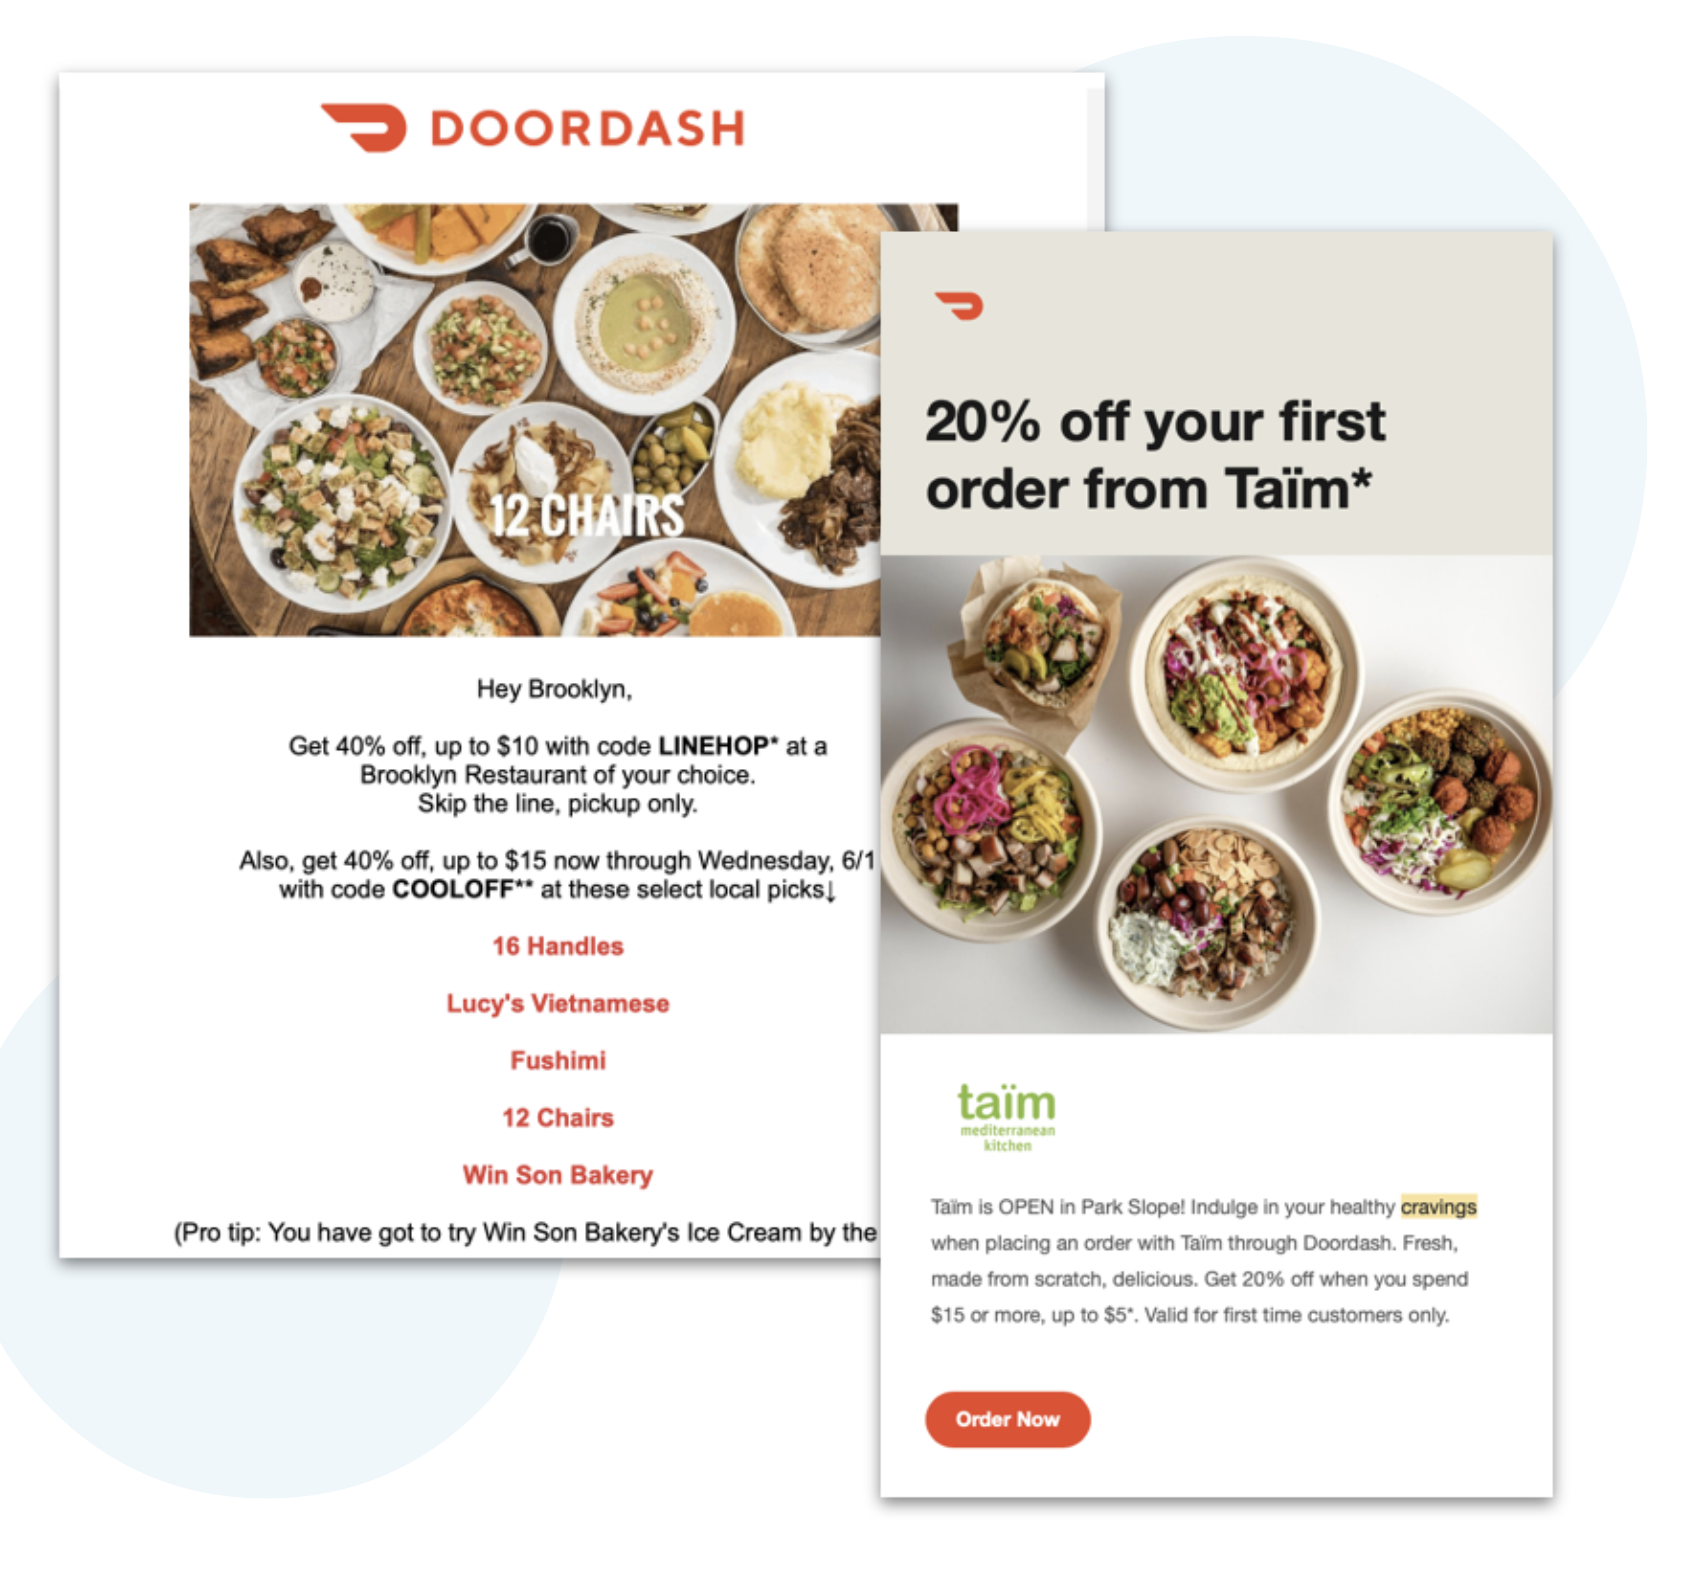 DoorDash personalized recommendations and offer